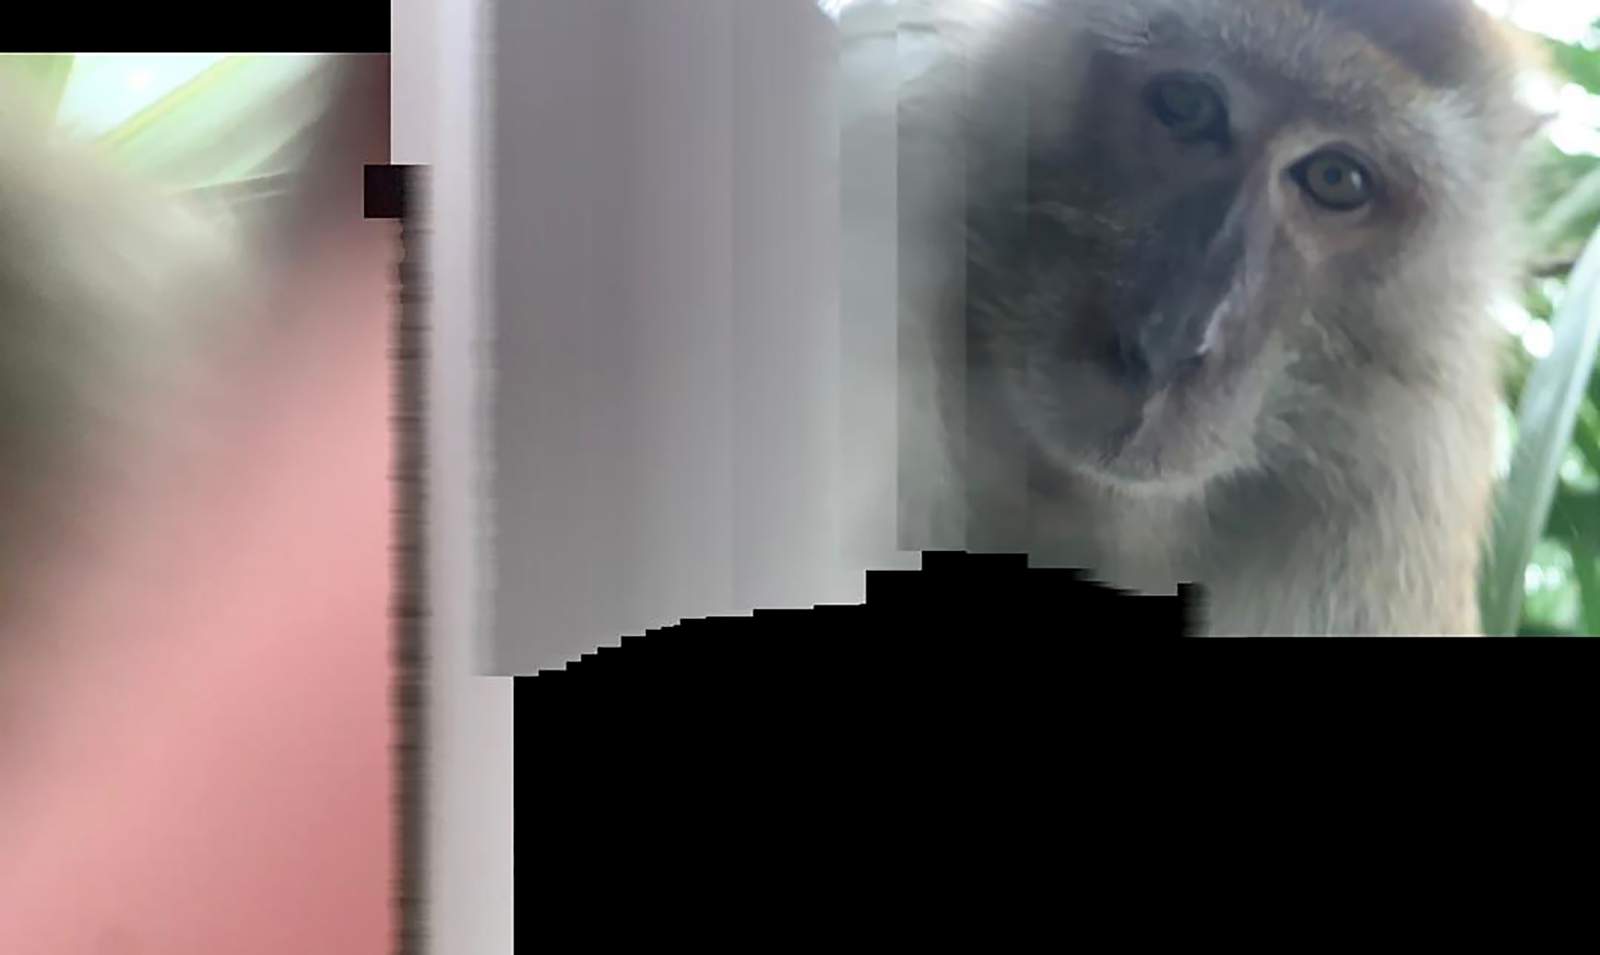 Just monkeying around: Primate takes phone, then selfies